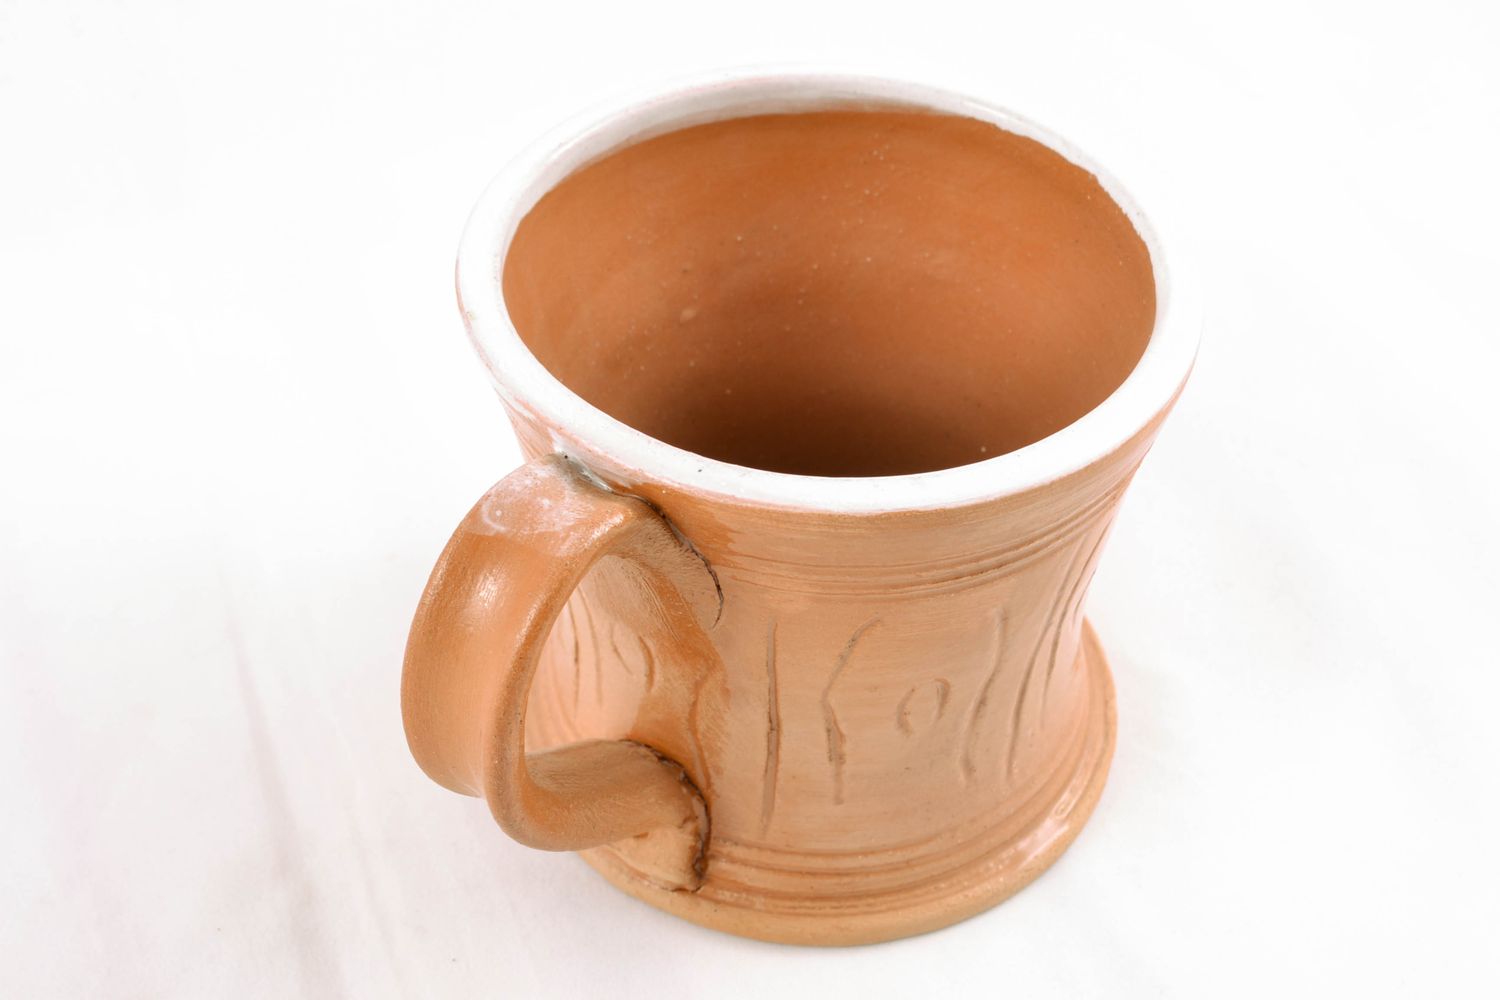 Glazed ceramic cup fir coffee and tea made of lead-free clay 1,22 lb photo 3